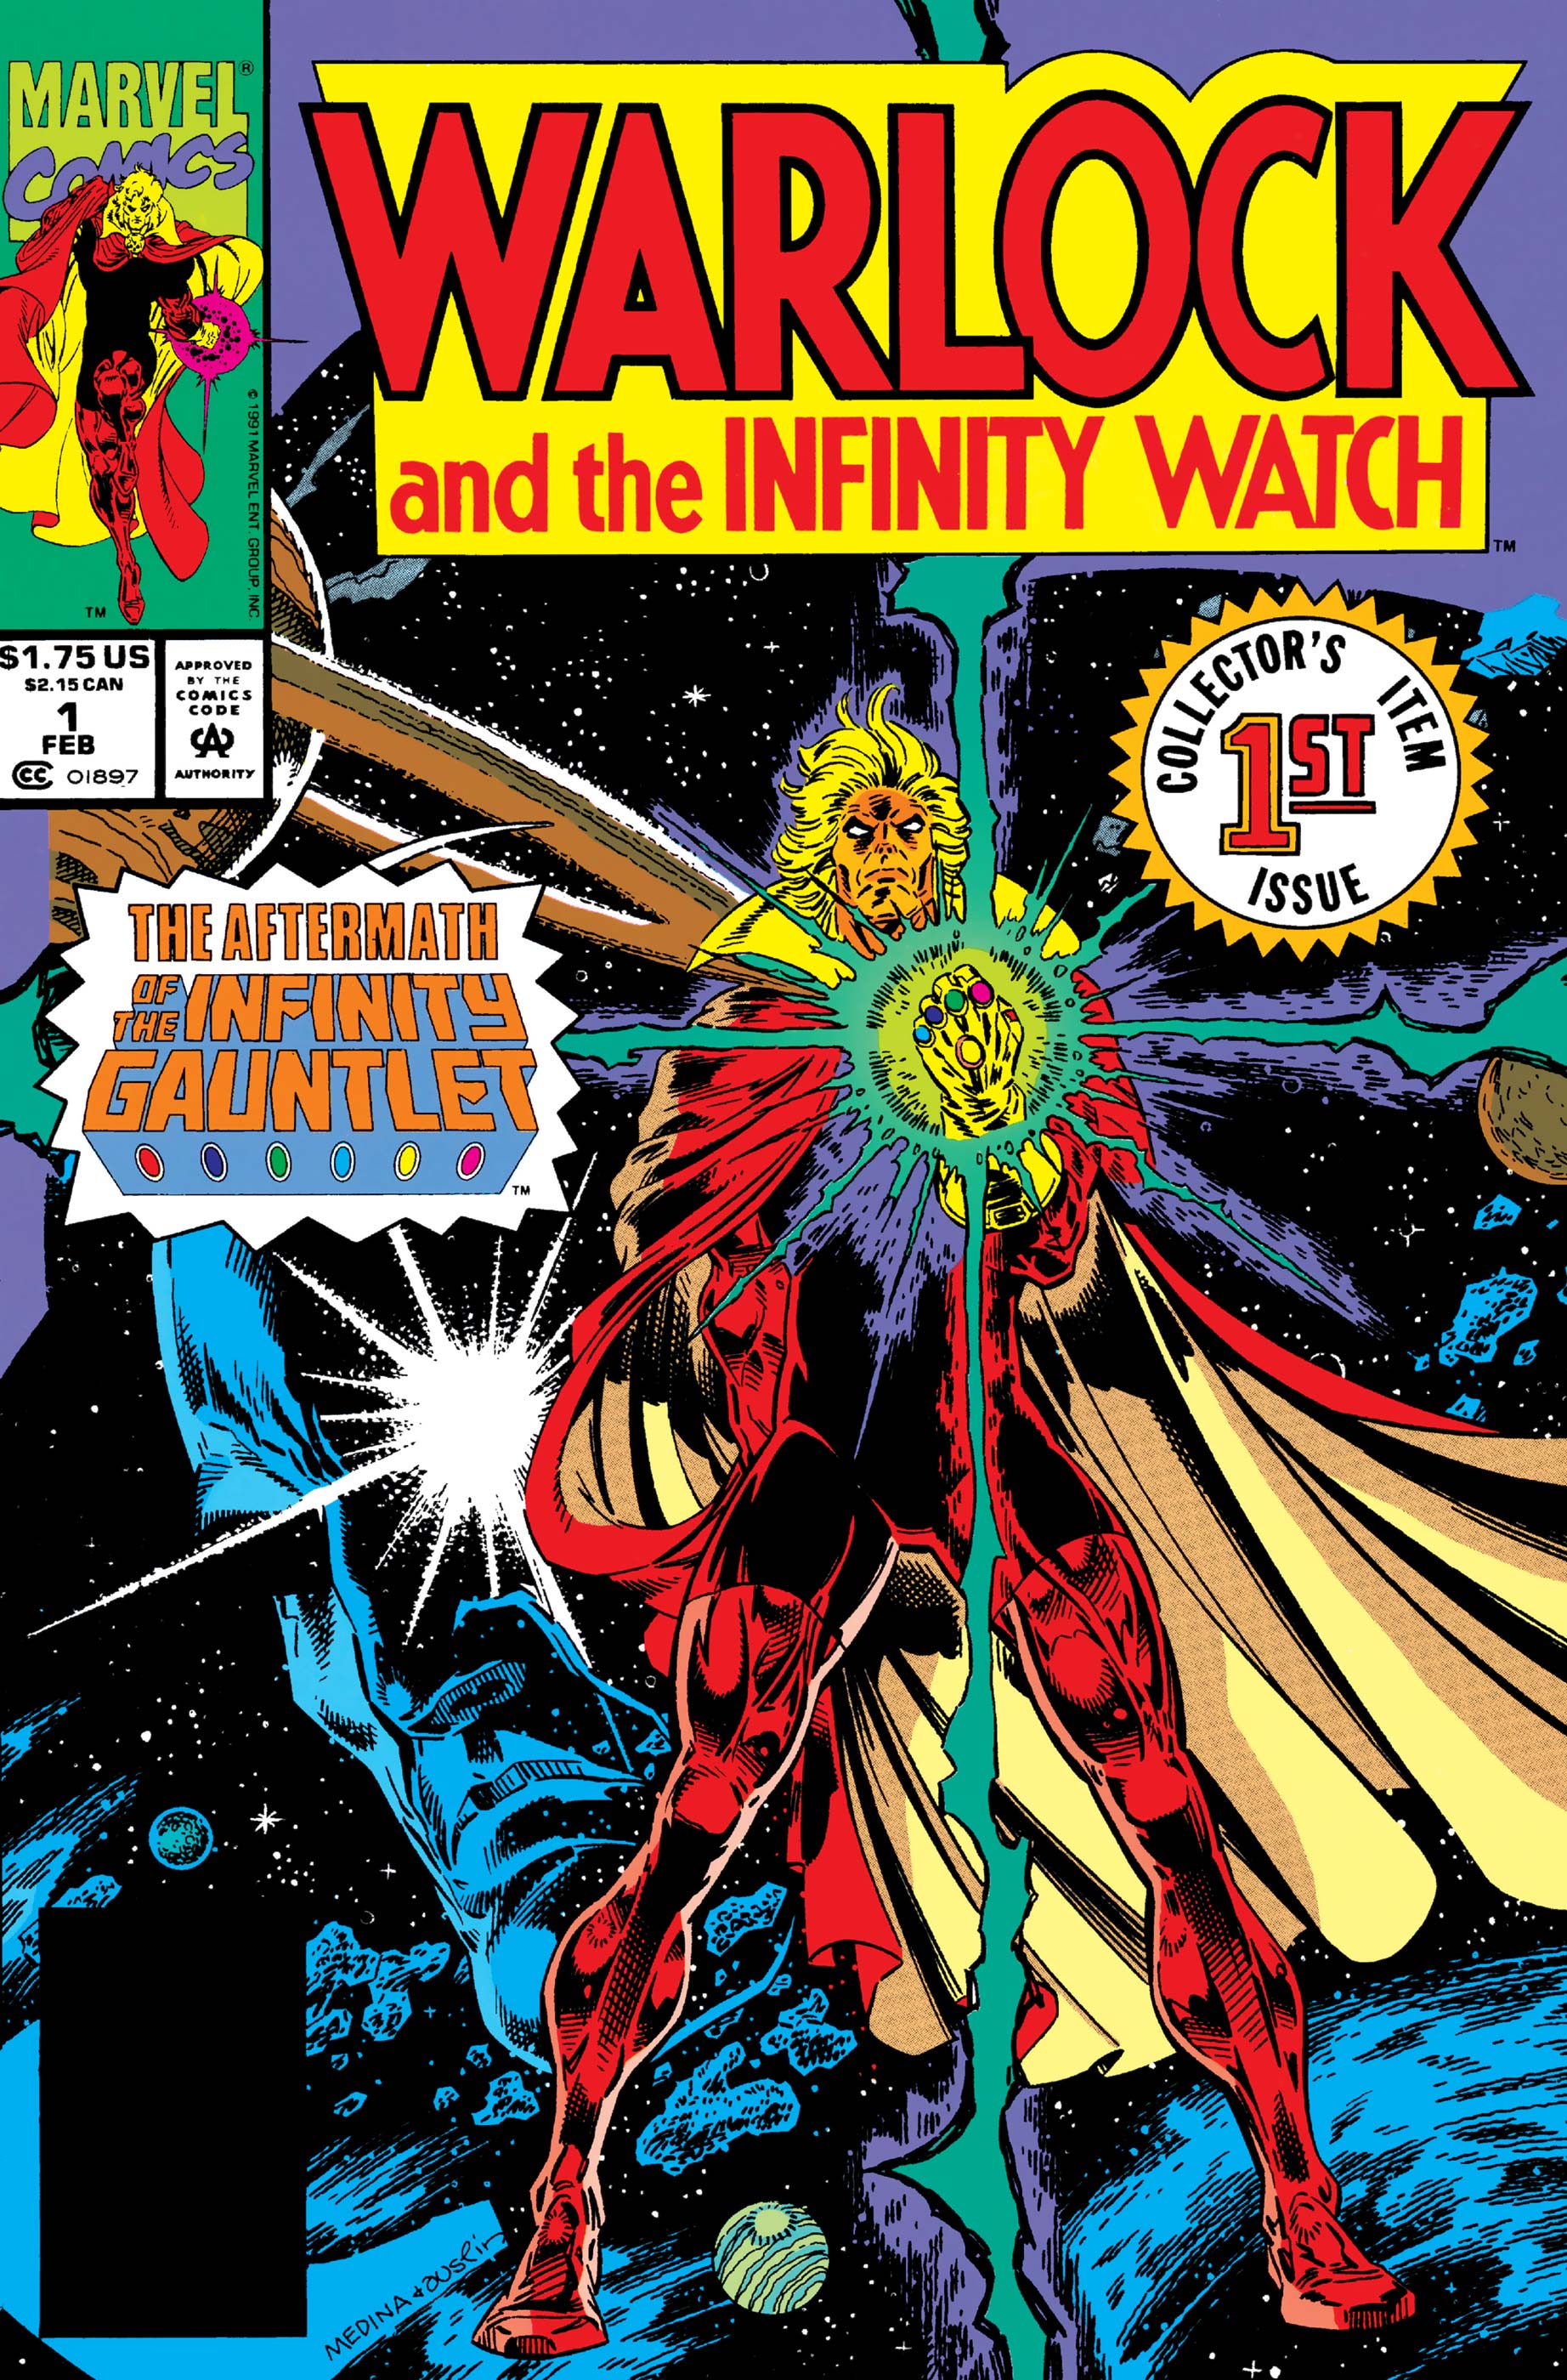 Warlock and the Infinity Watch (1992) #1